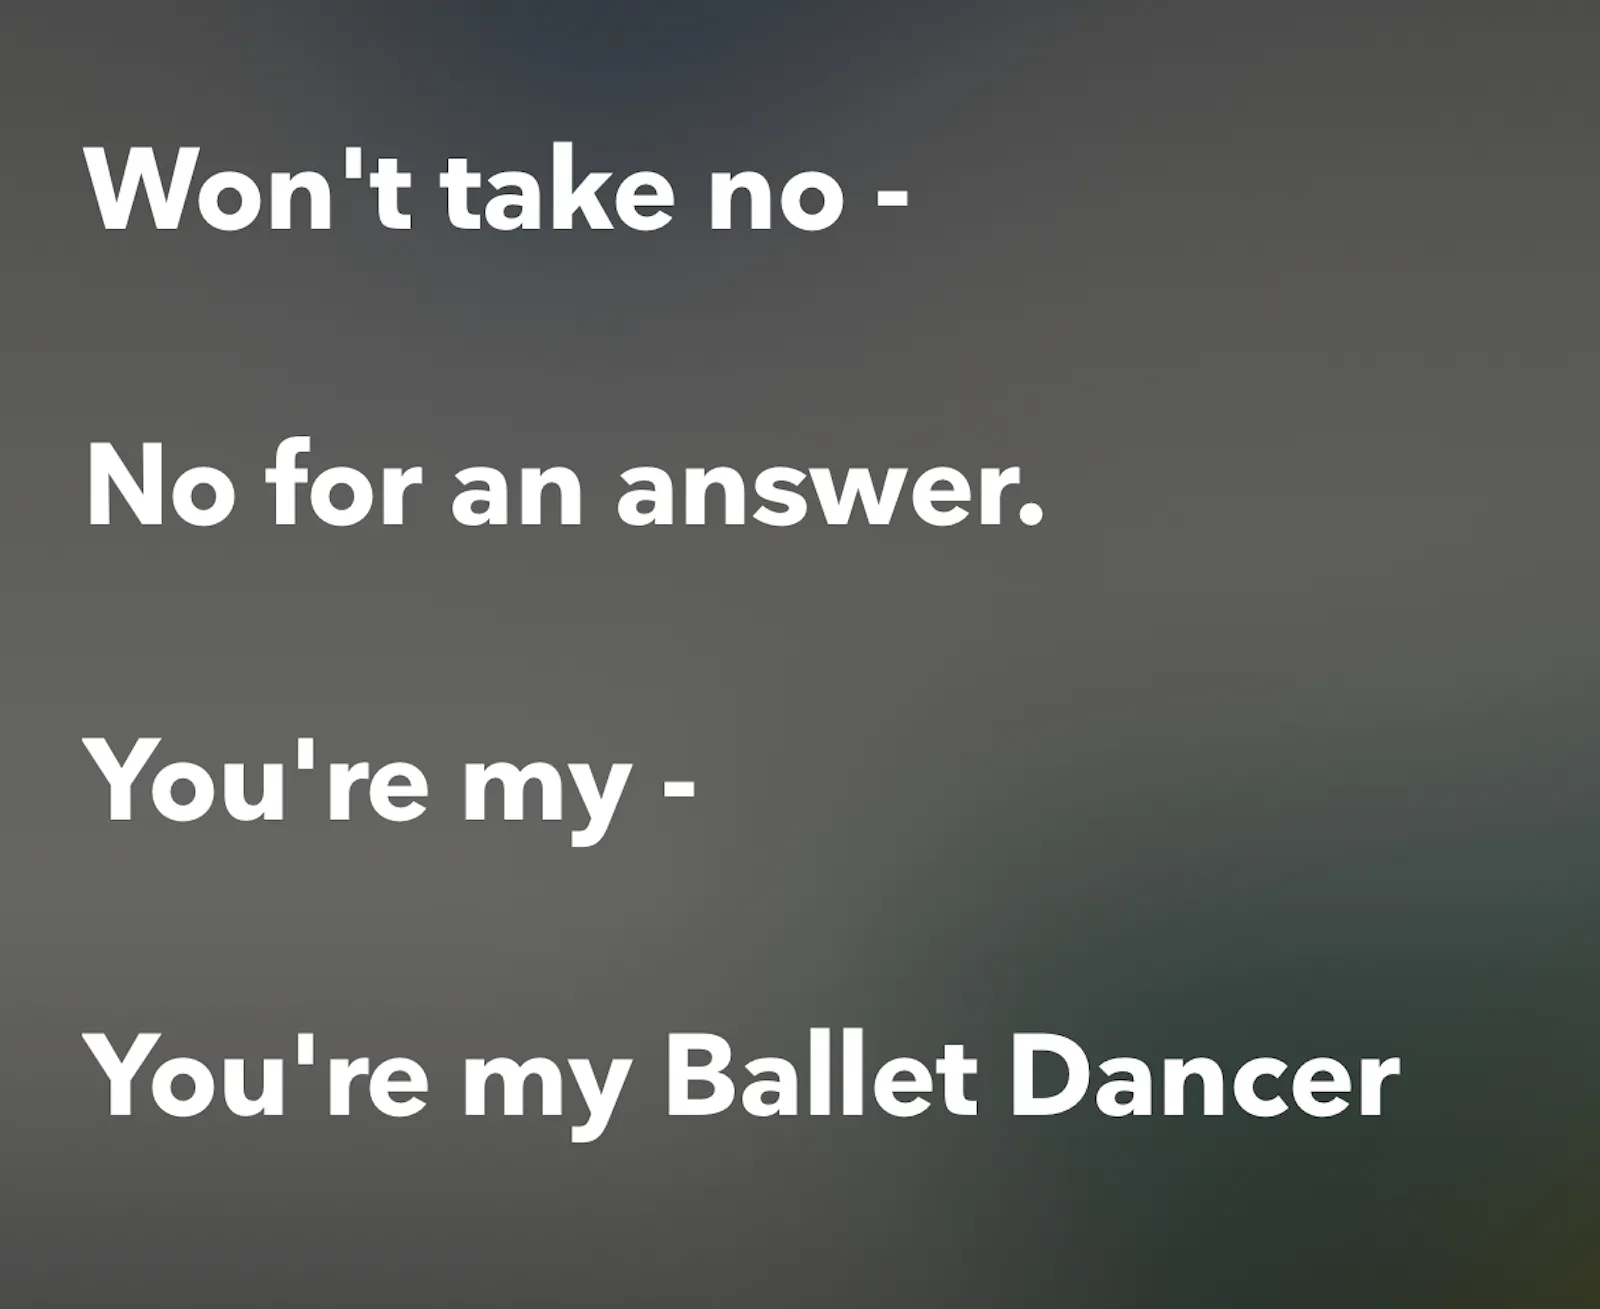 Won't take no not for an answer. You're my, you're my ballet dancer.